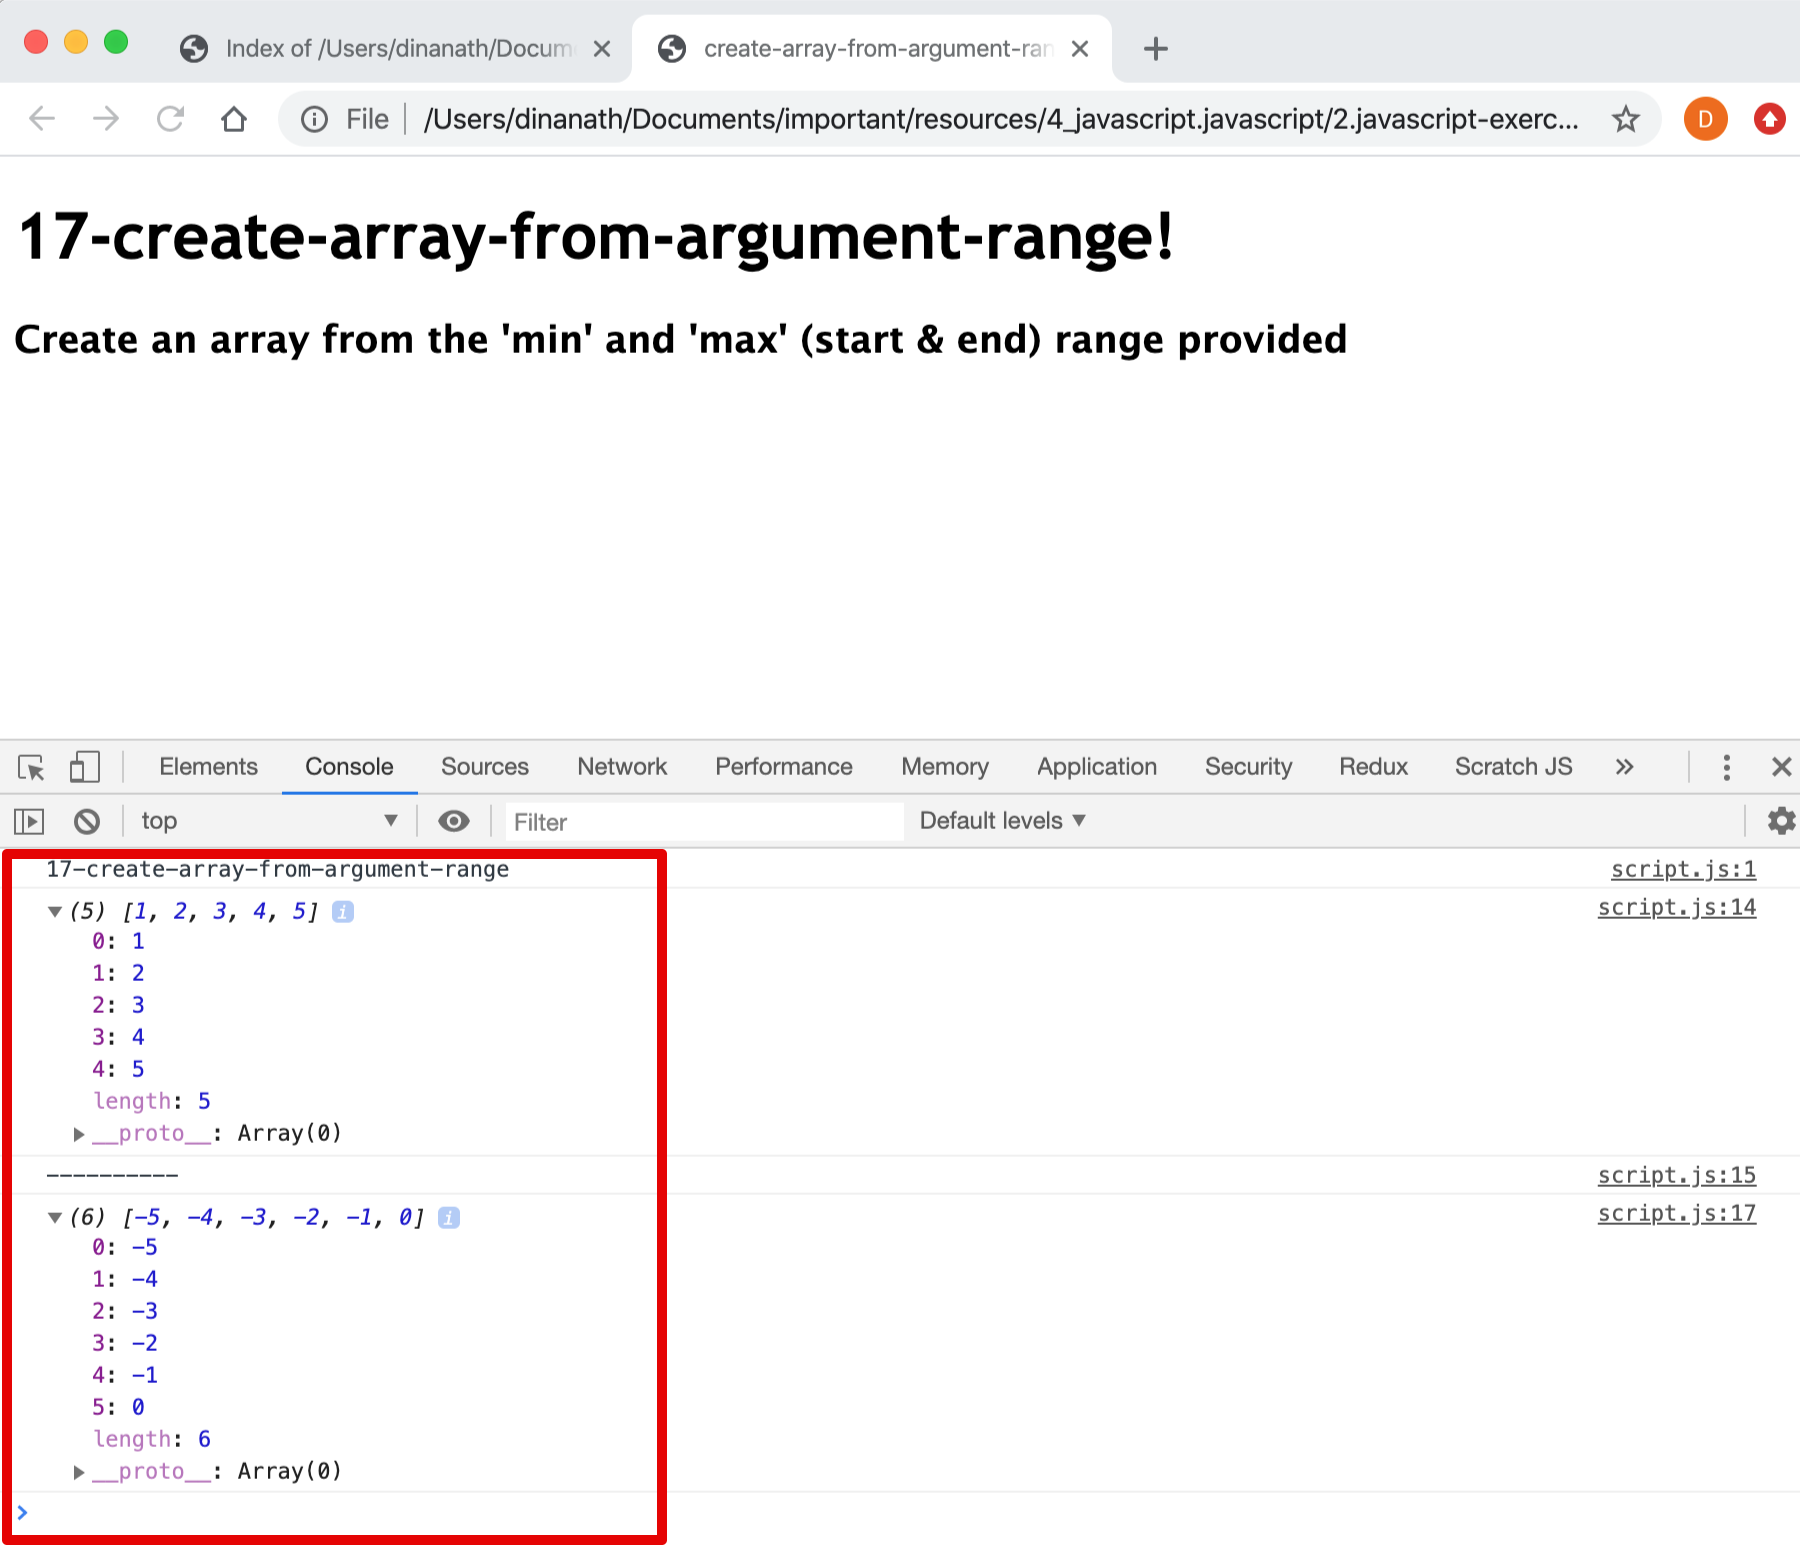 17-create-array-from-argument-range.png